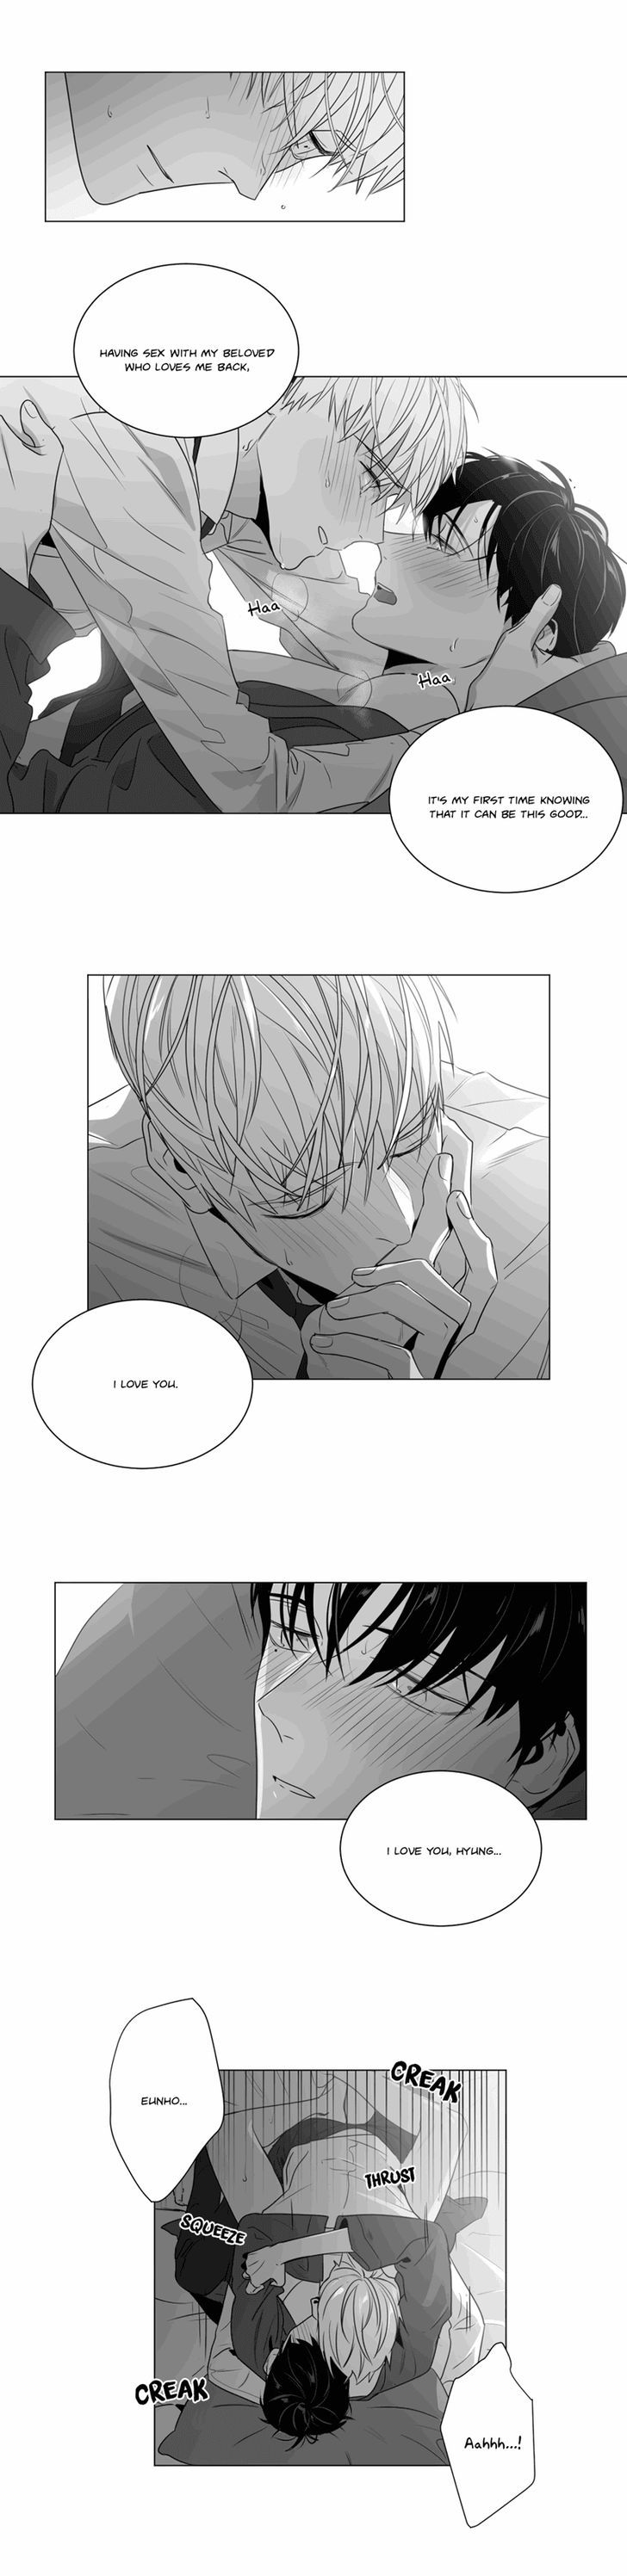 Lover Boy (Lezhin) Chapter 034 page 12